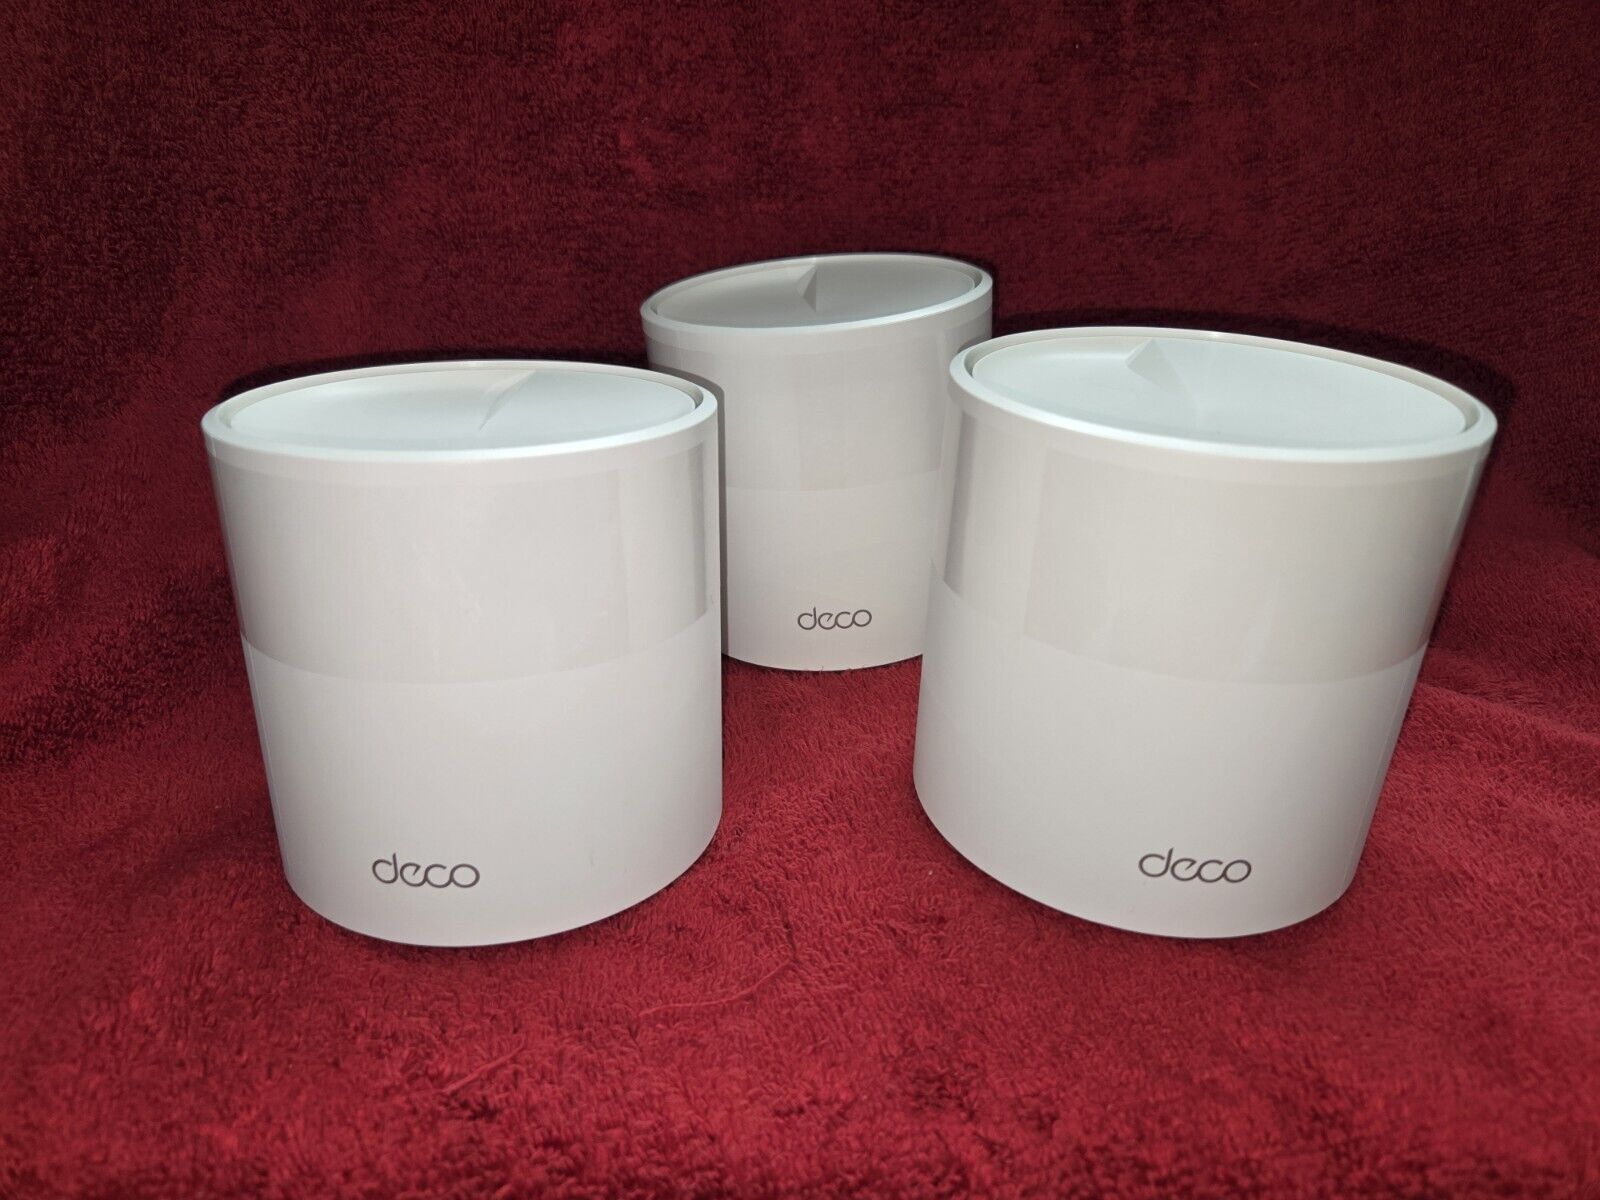 TP-Link Deco AX5000 Wi-Fi 6 Dual-Band Mesh System - 7,100 sq. ft. Coverage